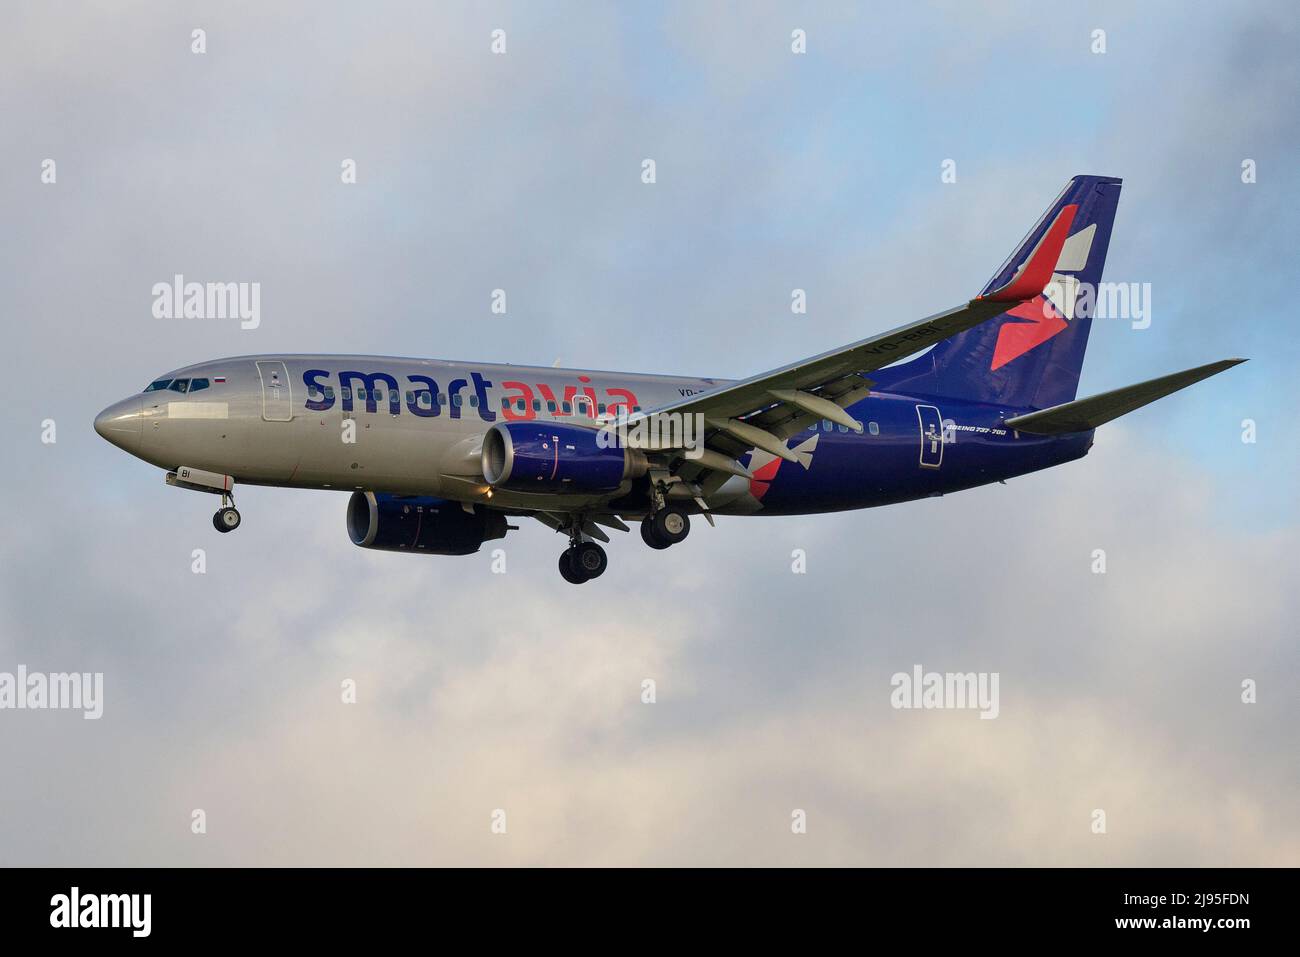 SAINT PETERSBURG, RUSSIA - OCTOBER 28, 2020: Airplane Boeing 737-700 (VQ-BBI) of Smartavia airline in cloudy sky. Profile view Stock Photo